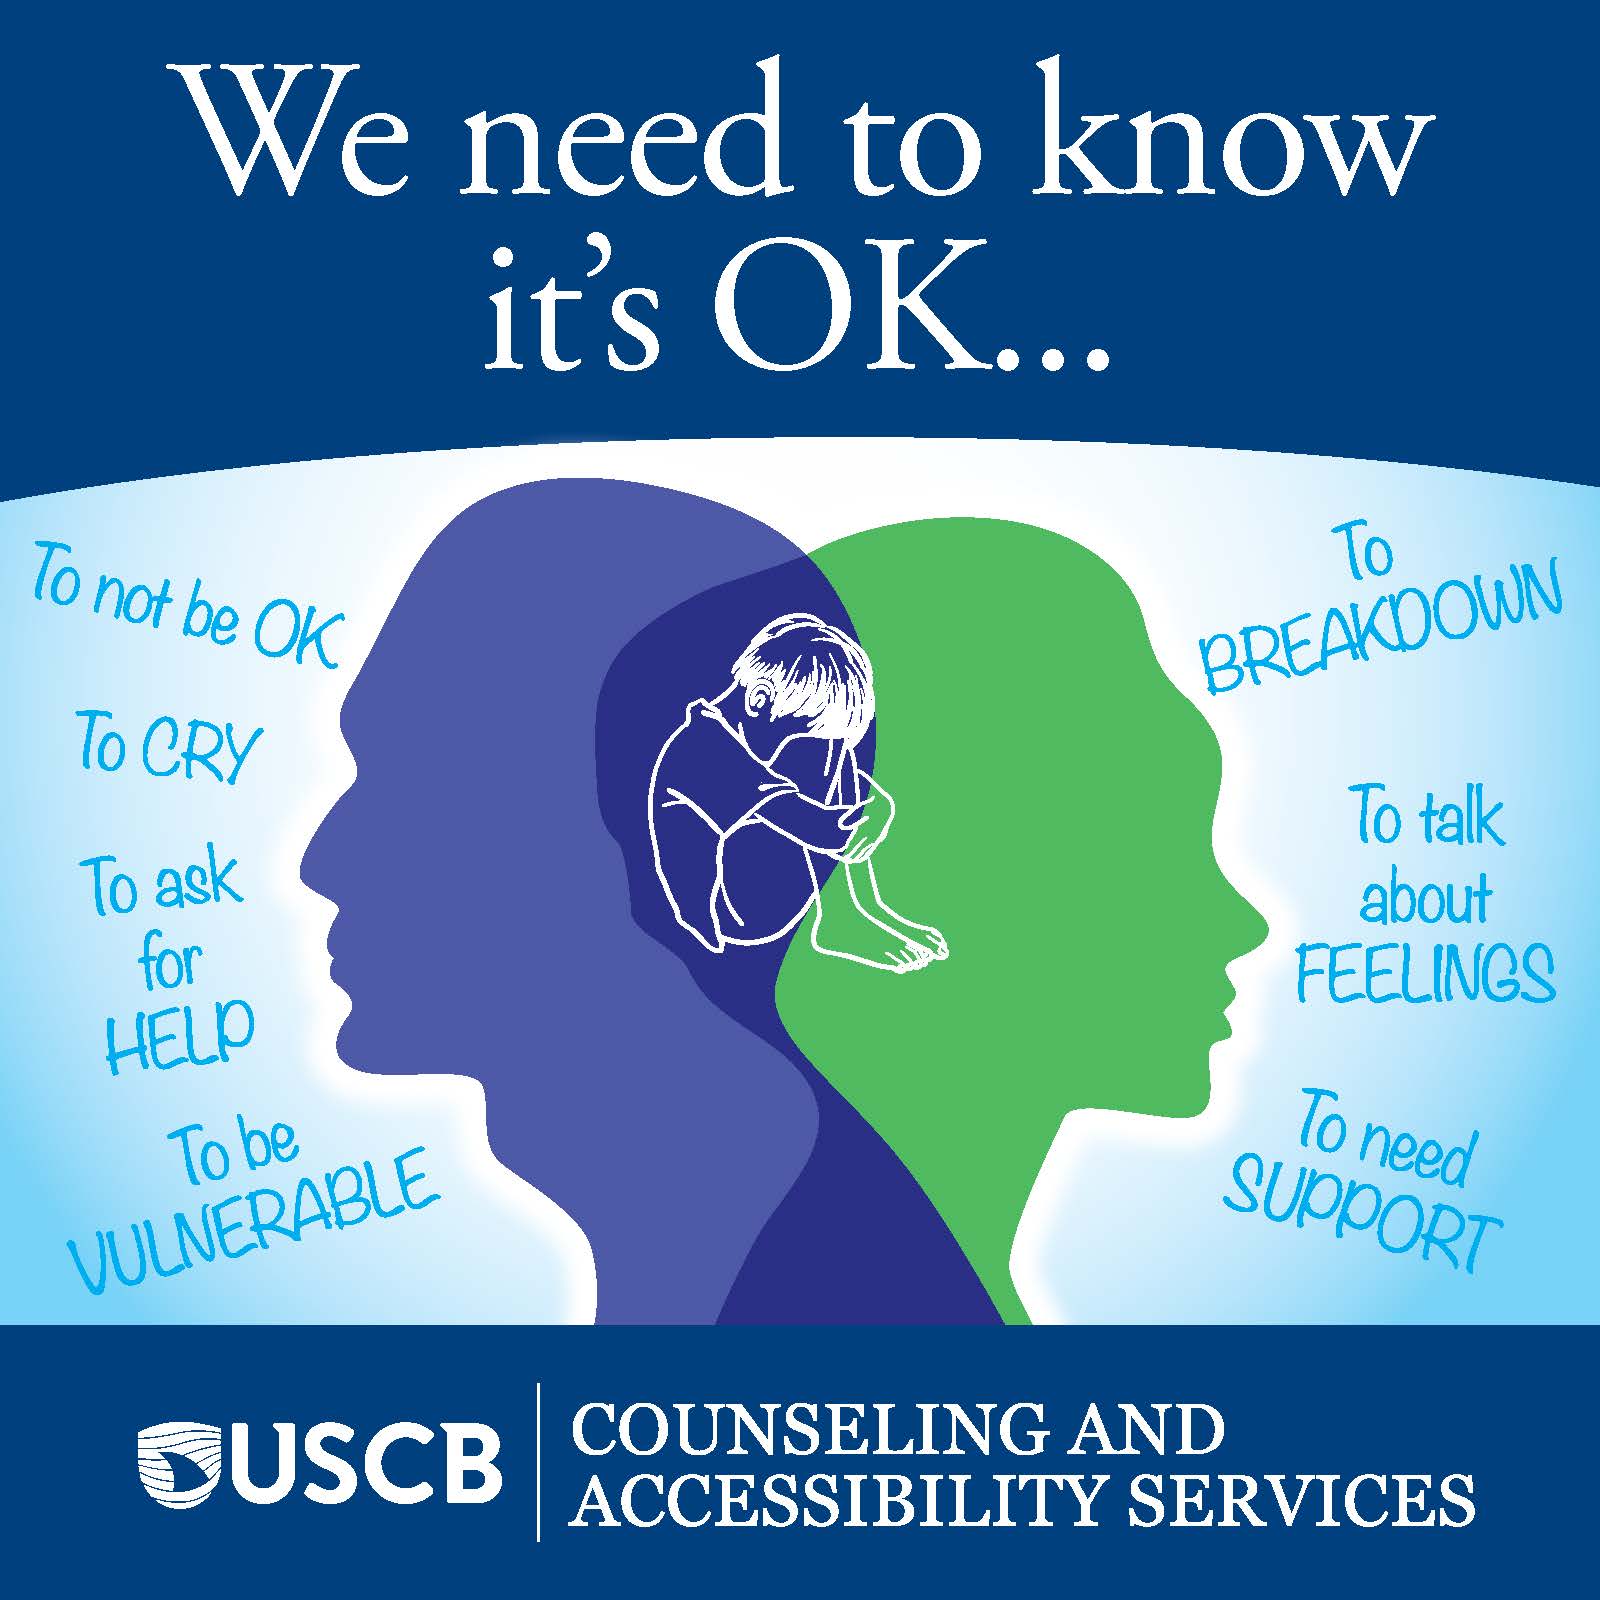 Counseling and Accessibility Services. We need to know it's ok . . . to not be ok, to cry, to ask for help, to be vulnerable, to breakdown, to talk about feelings, to need support. USCB Counseling and Accessibility Services